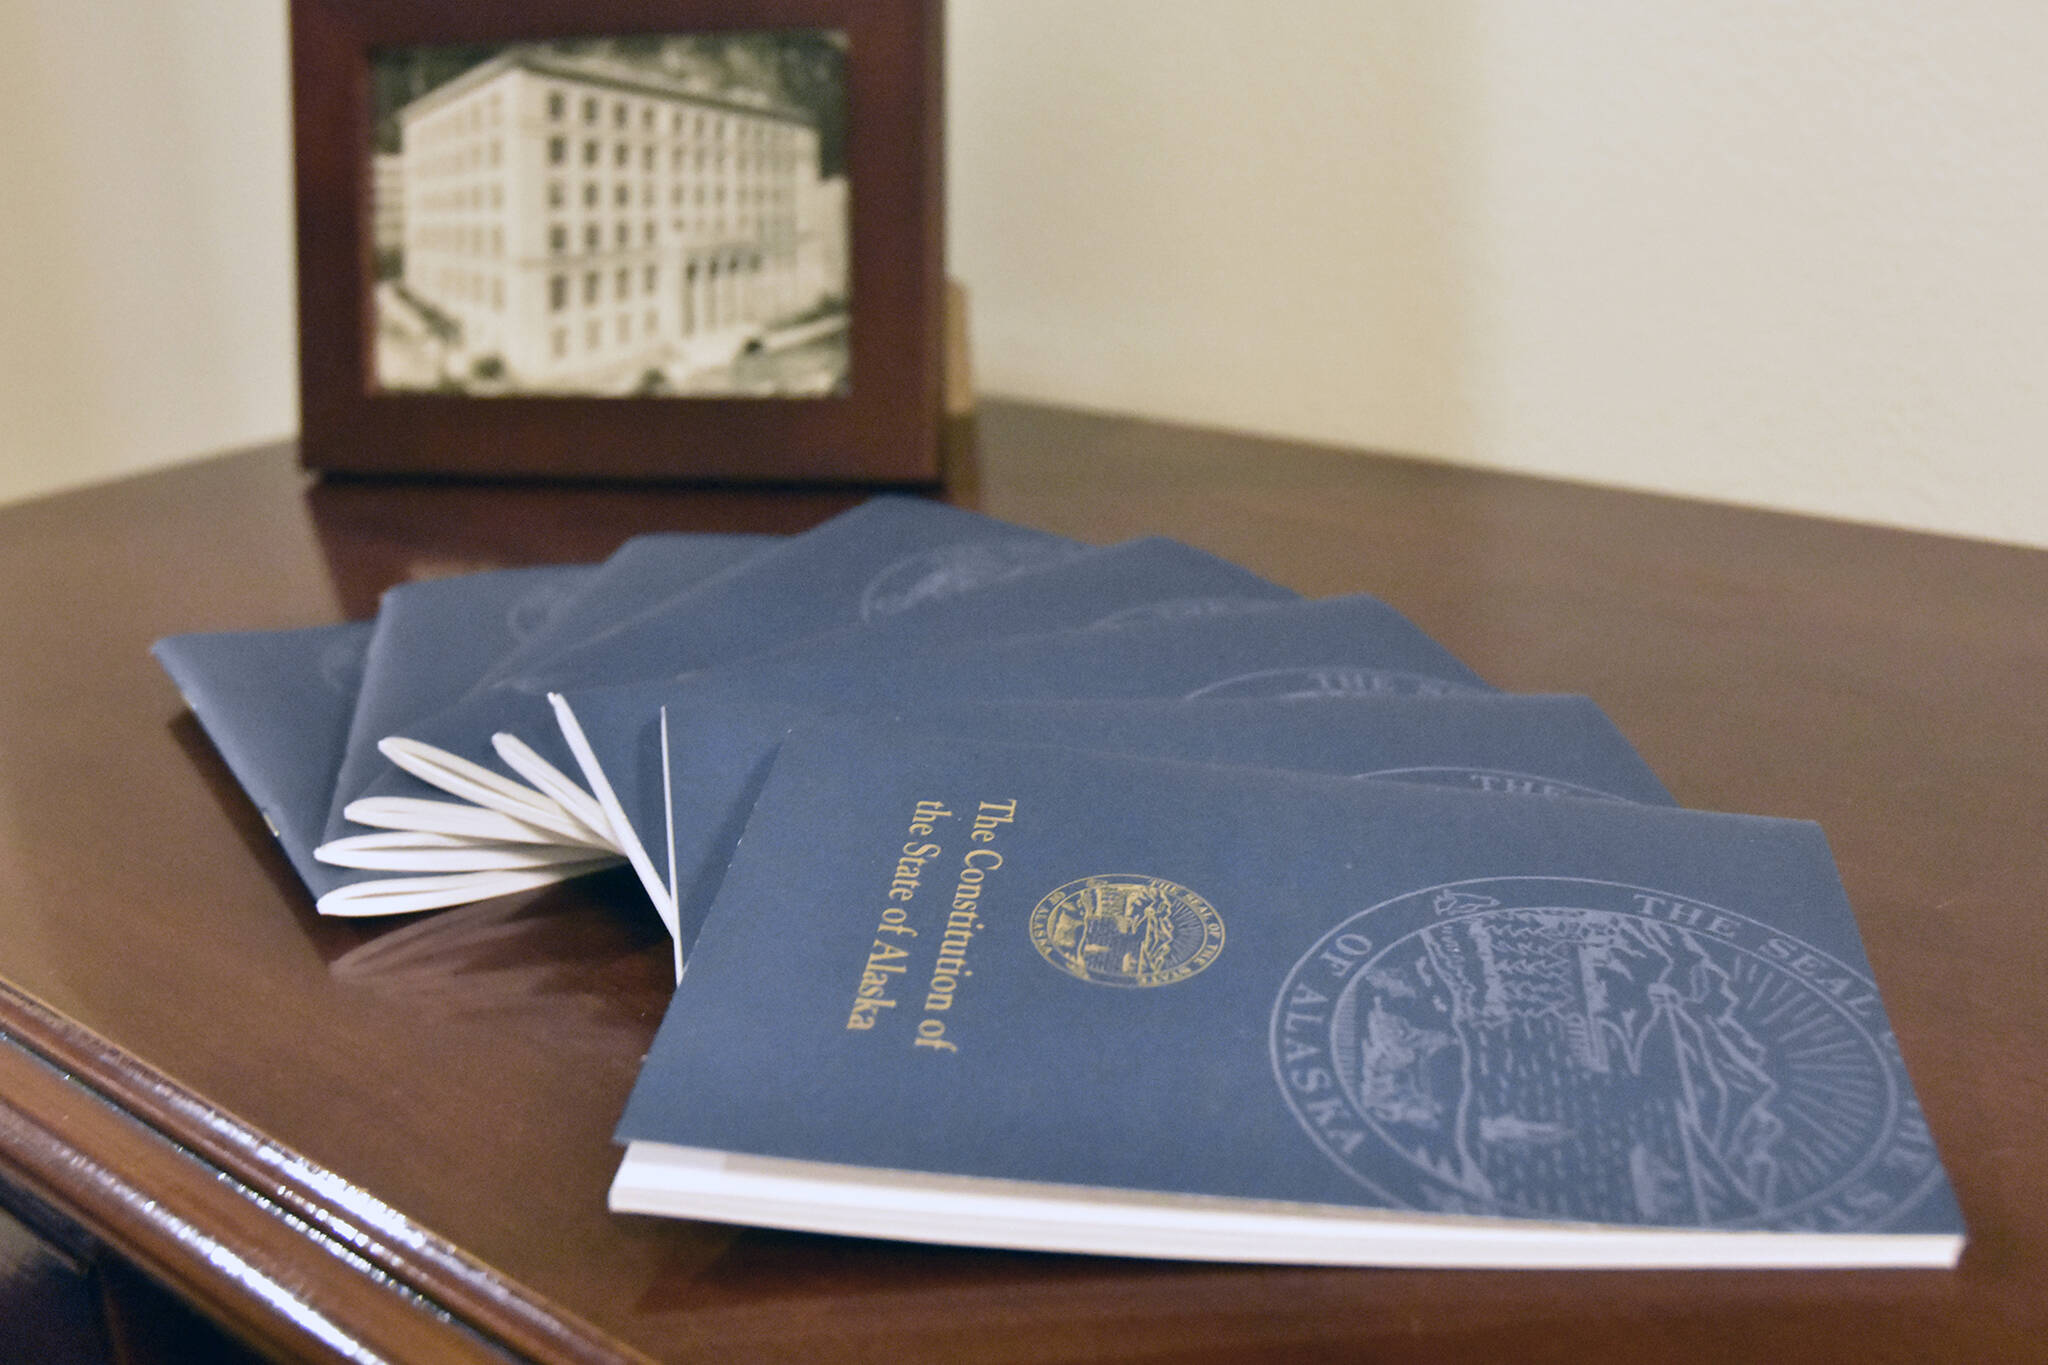 Copies of the Alaska State Constitution were available outside the lieutenant governor’s office on Monday, Dec. 13, 2021. If voters choose to have a constitutional convention, the state’s foundational document could be re-written. (Peter Segall/Juneau Empire)